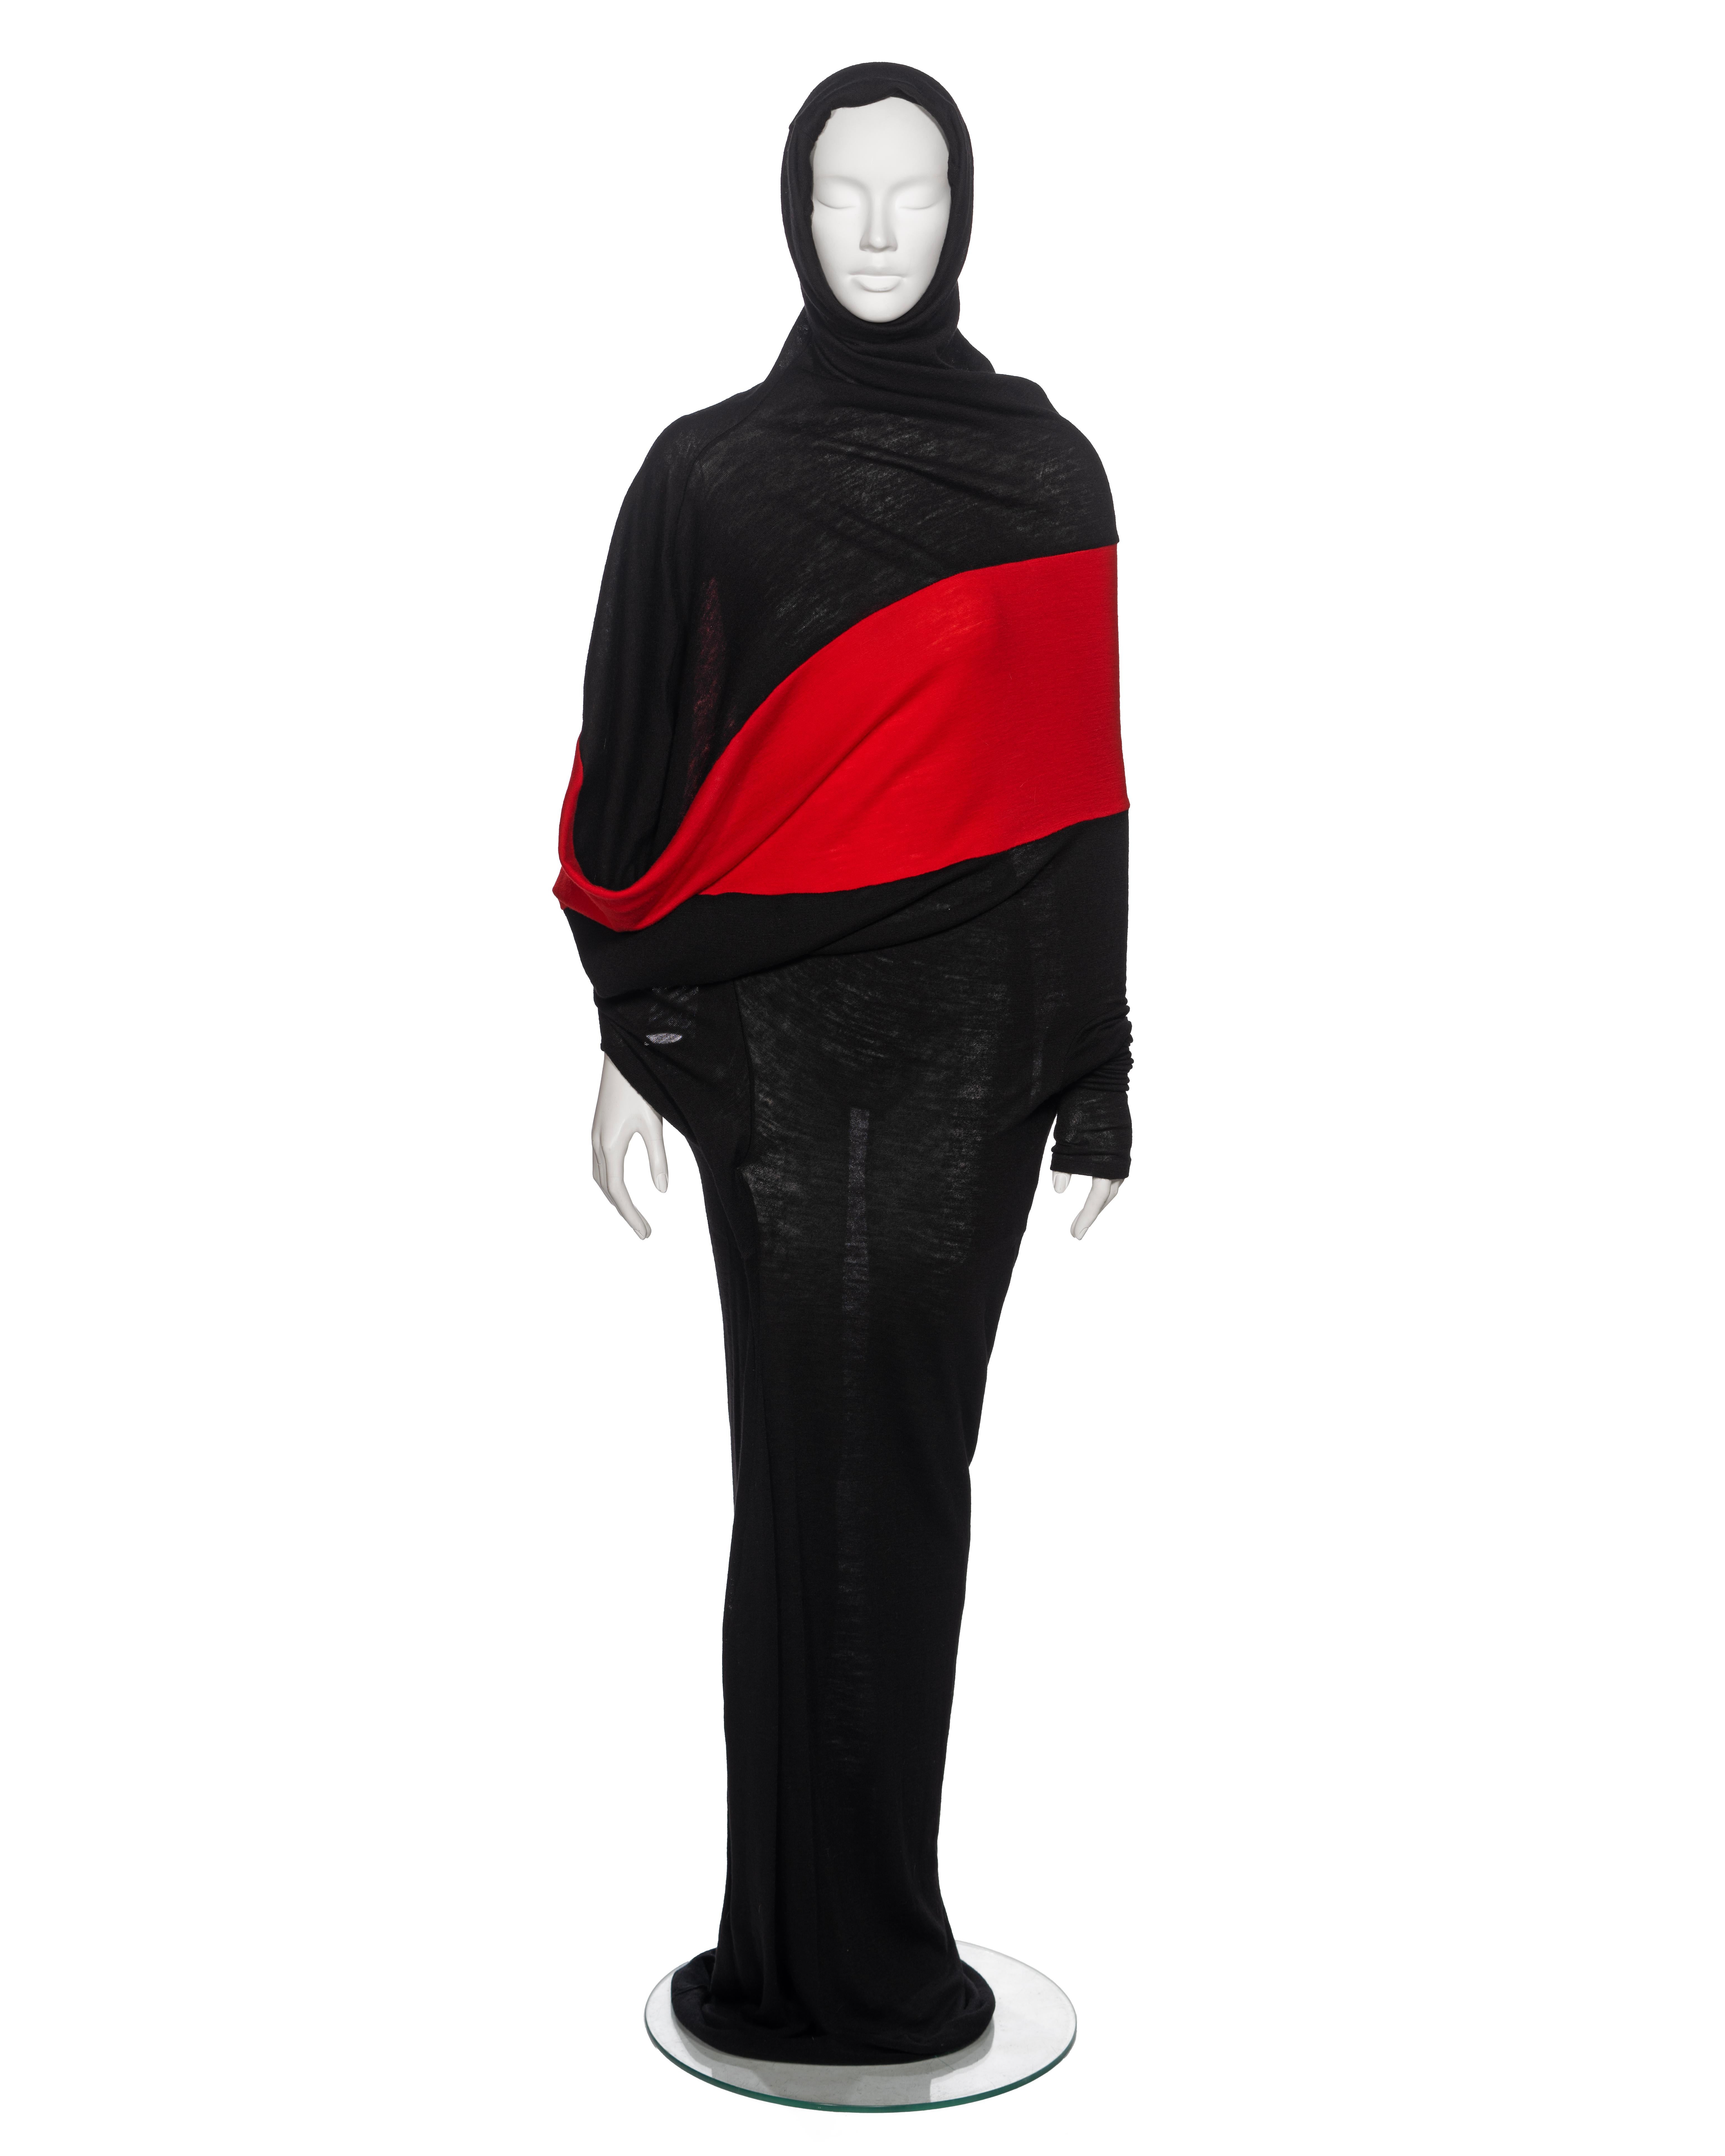 ▪ Yohji Yamamoto Black and Red Wool Asymmetric Convertible Maxi Dress
▪ Fall-Winter 2012
▪ Crafted from high-quality fine wool jersey
▪ A striking contrasting red panel runs horizontally around the bodice
▪ The asymmetric cut of the garment allows